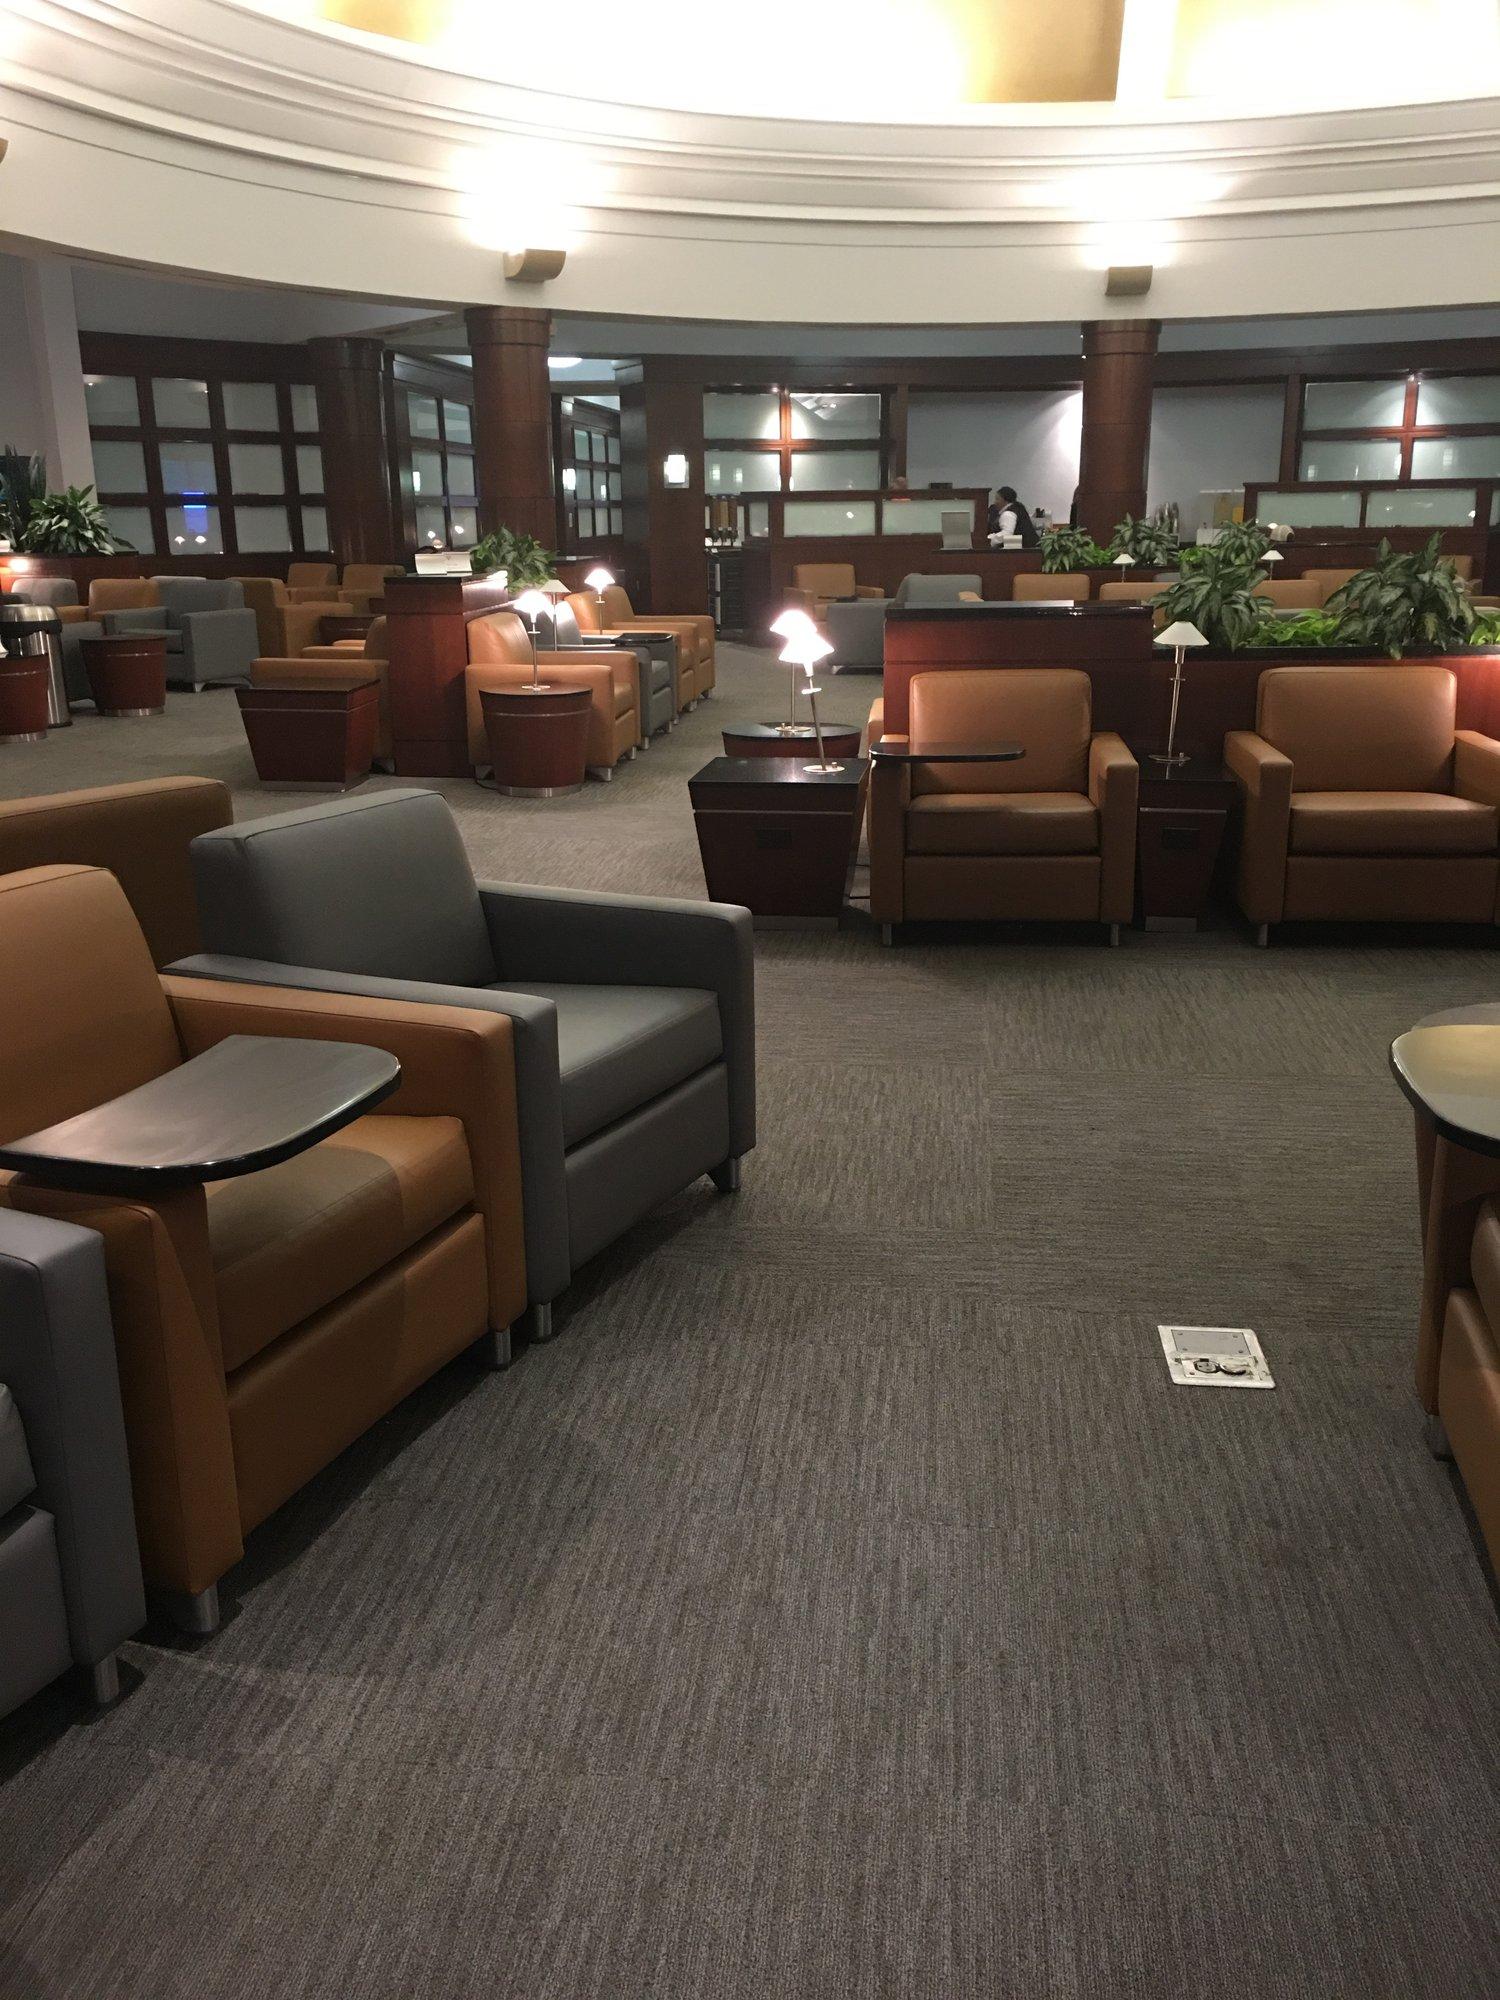 American Airlines Admirals Club image 25 of 37